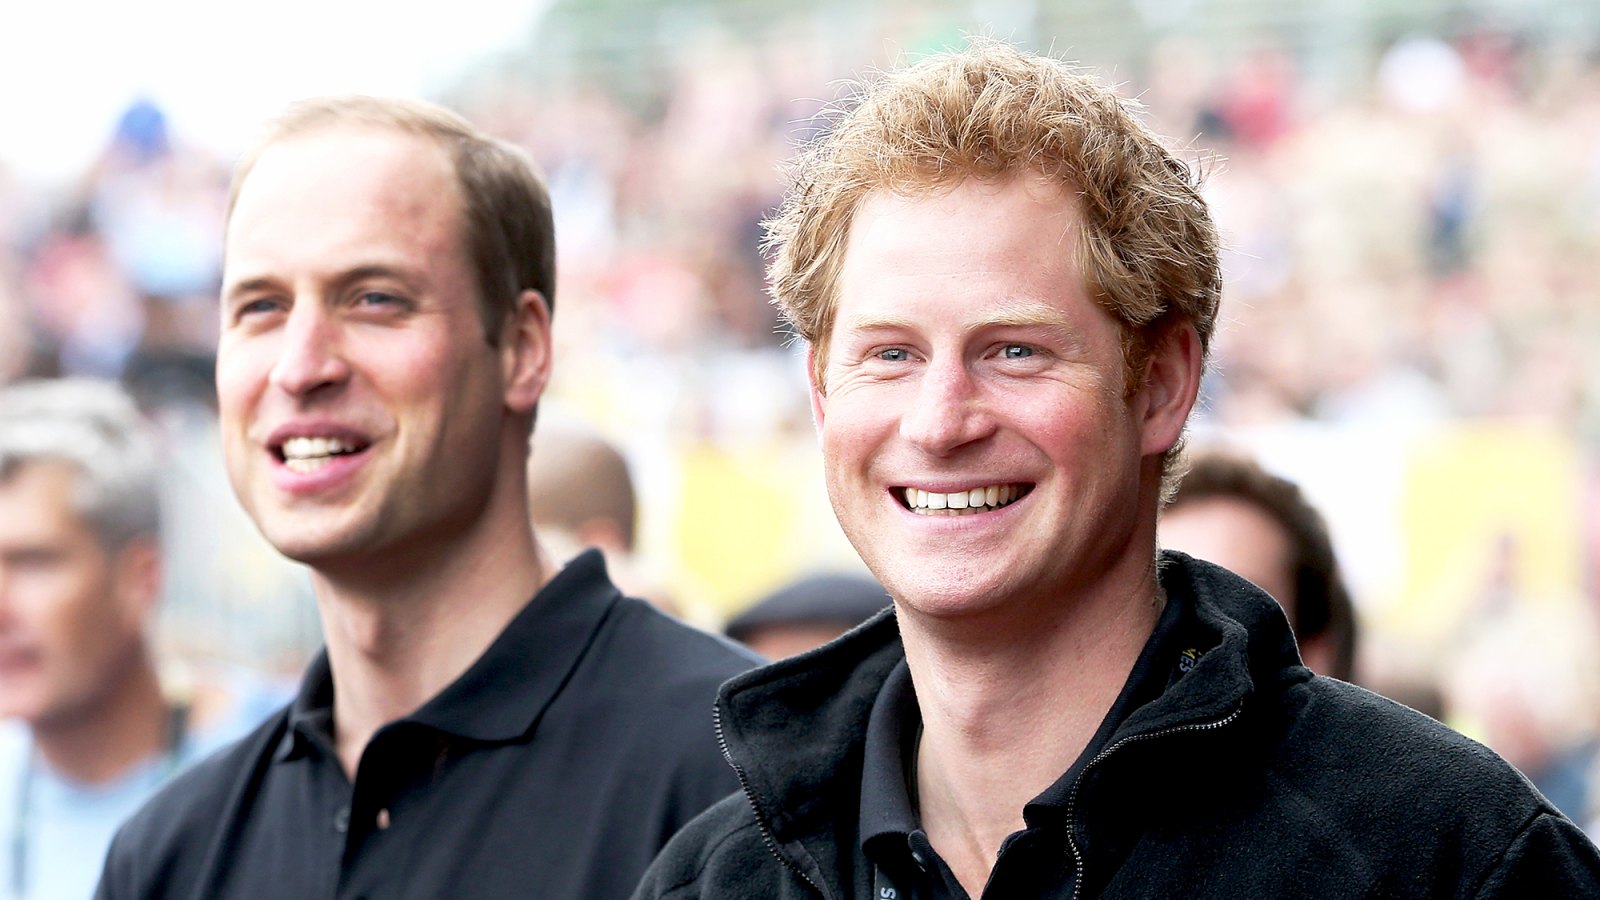 Prince William, Duke of Cambridge and his brother Prince Harry cheers the athletes during the Invictus Games athletics at Lee Valley in London, England.